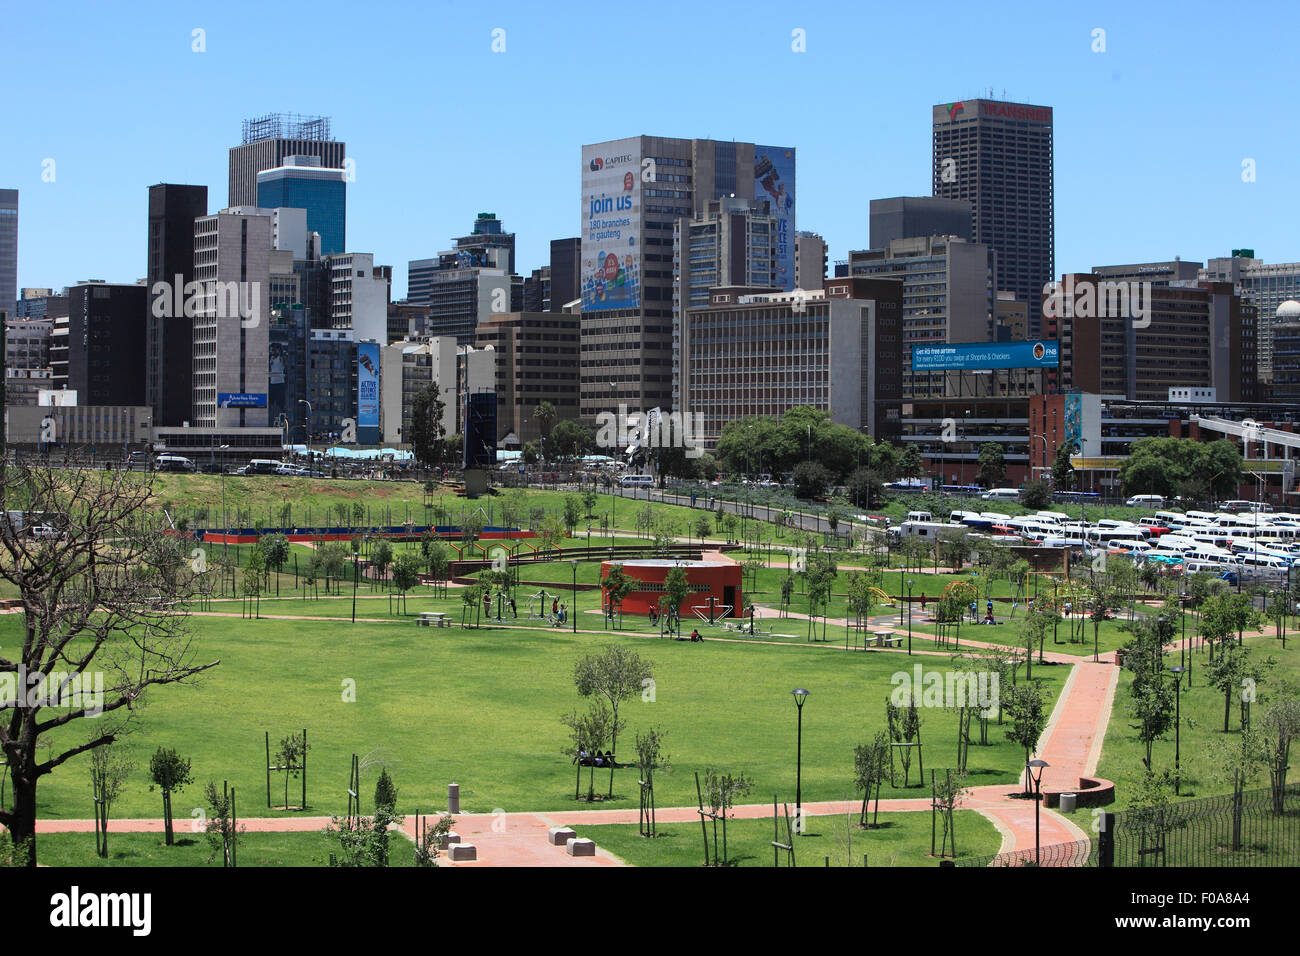 South Africa, Johannesburg. View from Joburg's first tour bus of the inner city CBD and park near Newtown. Stock Photo